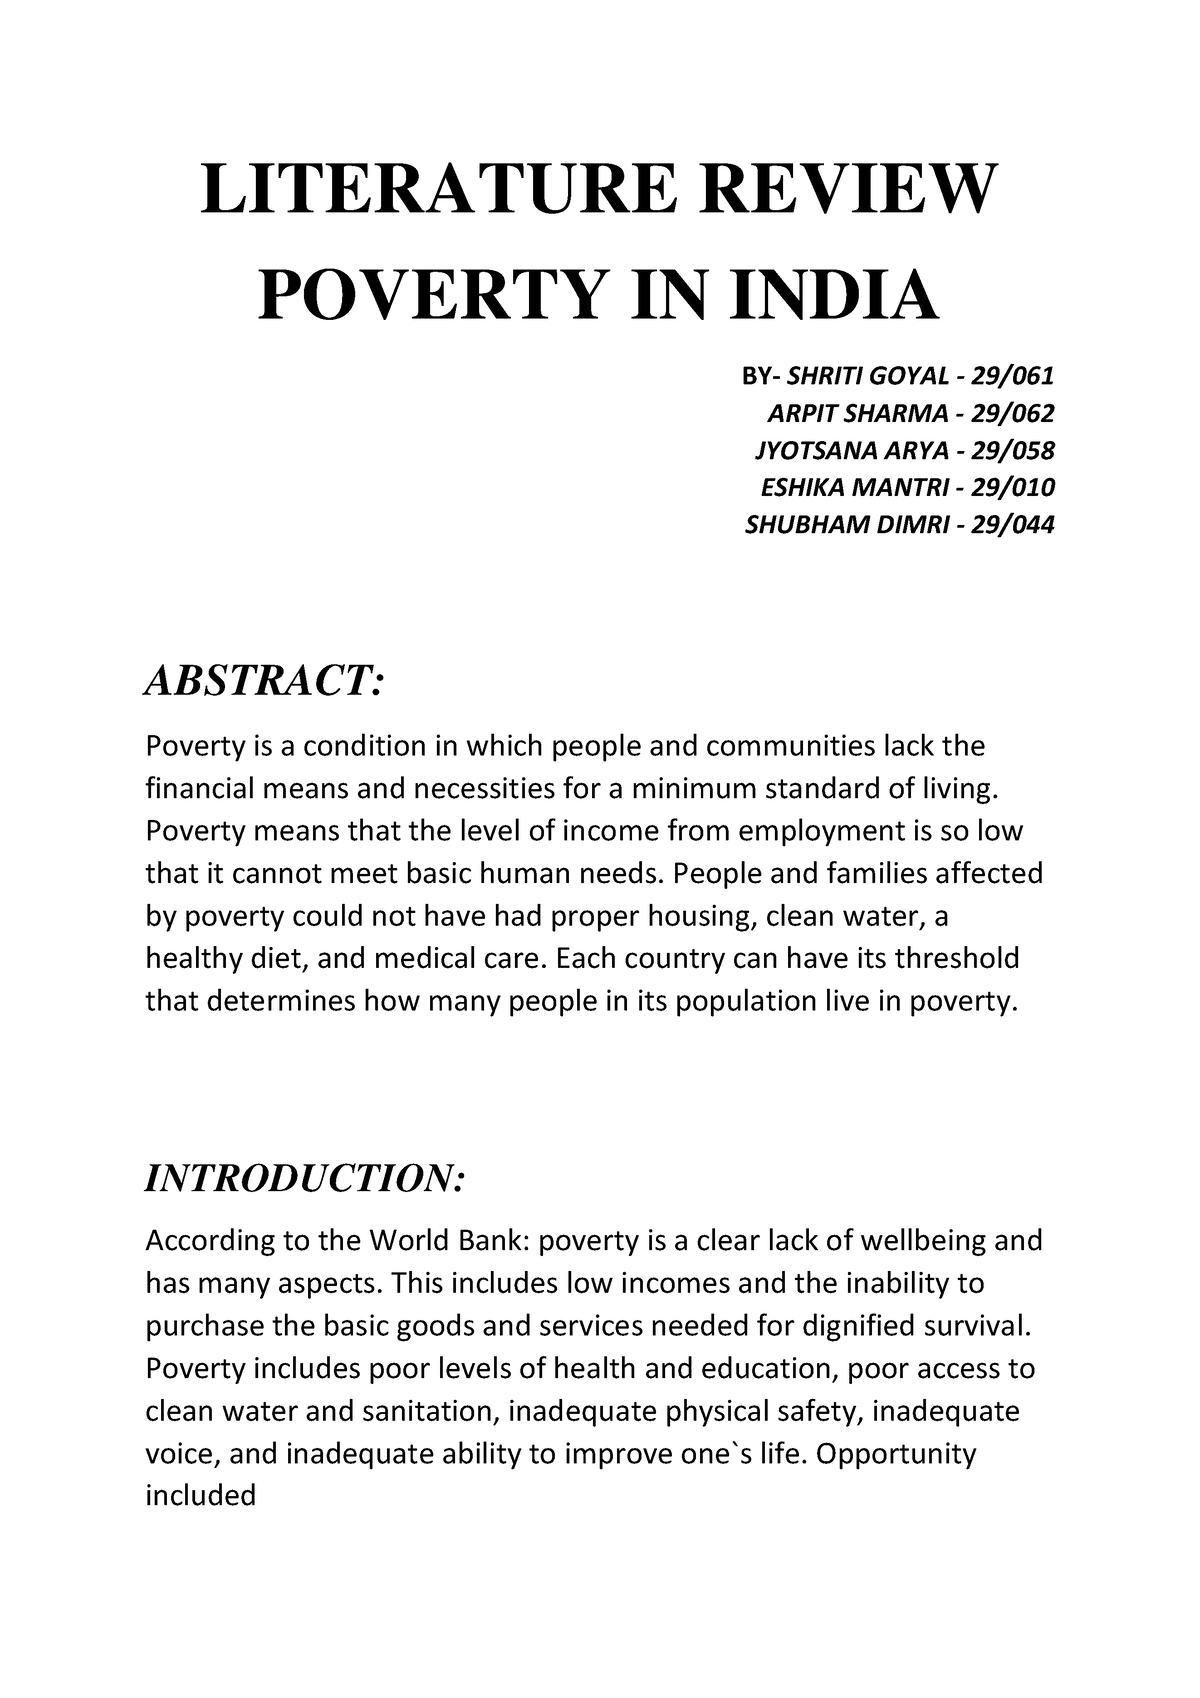 preliminary literature review about poverty